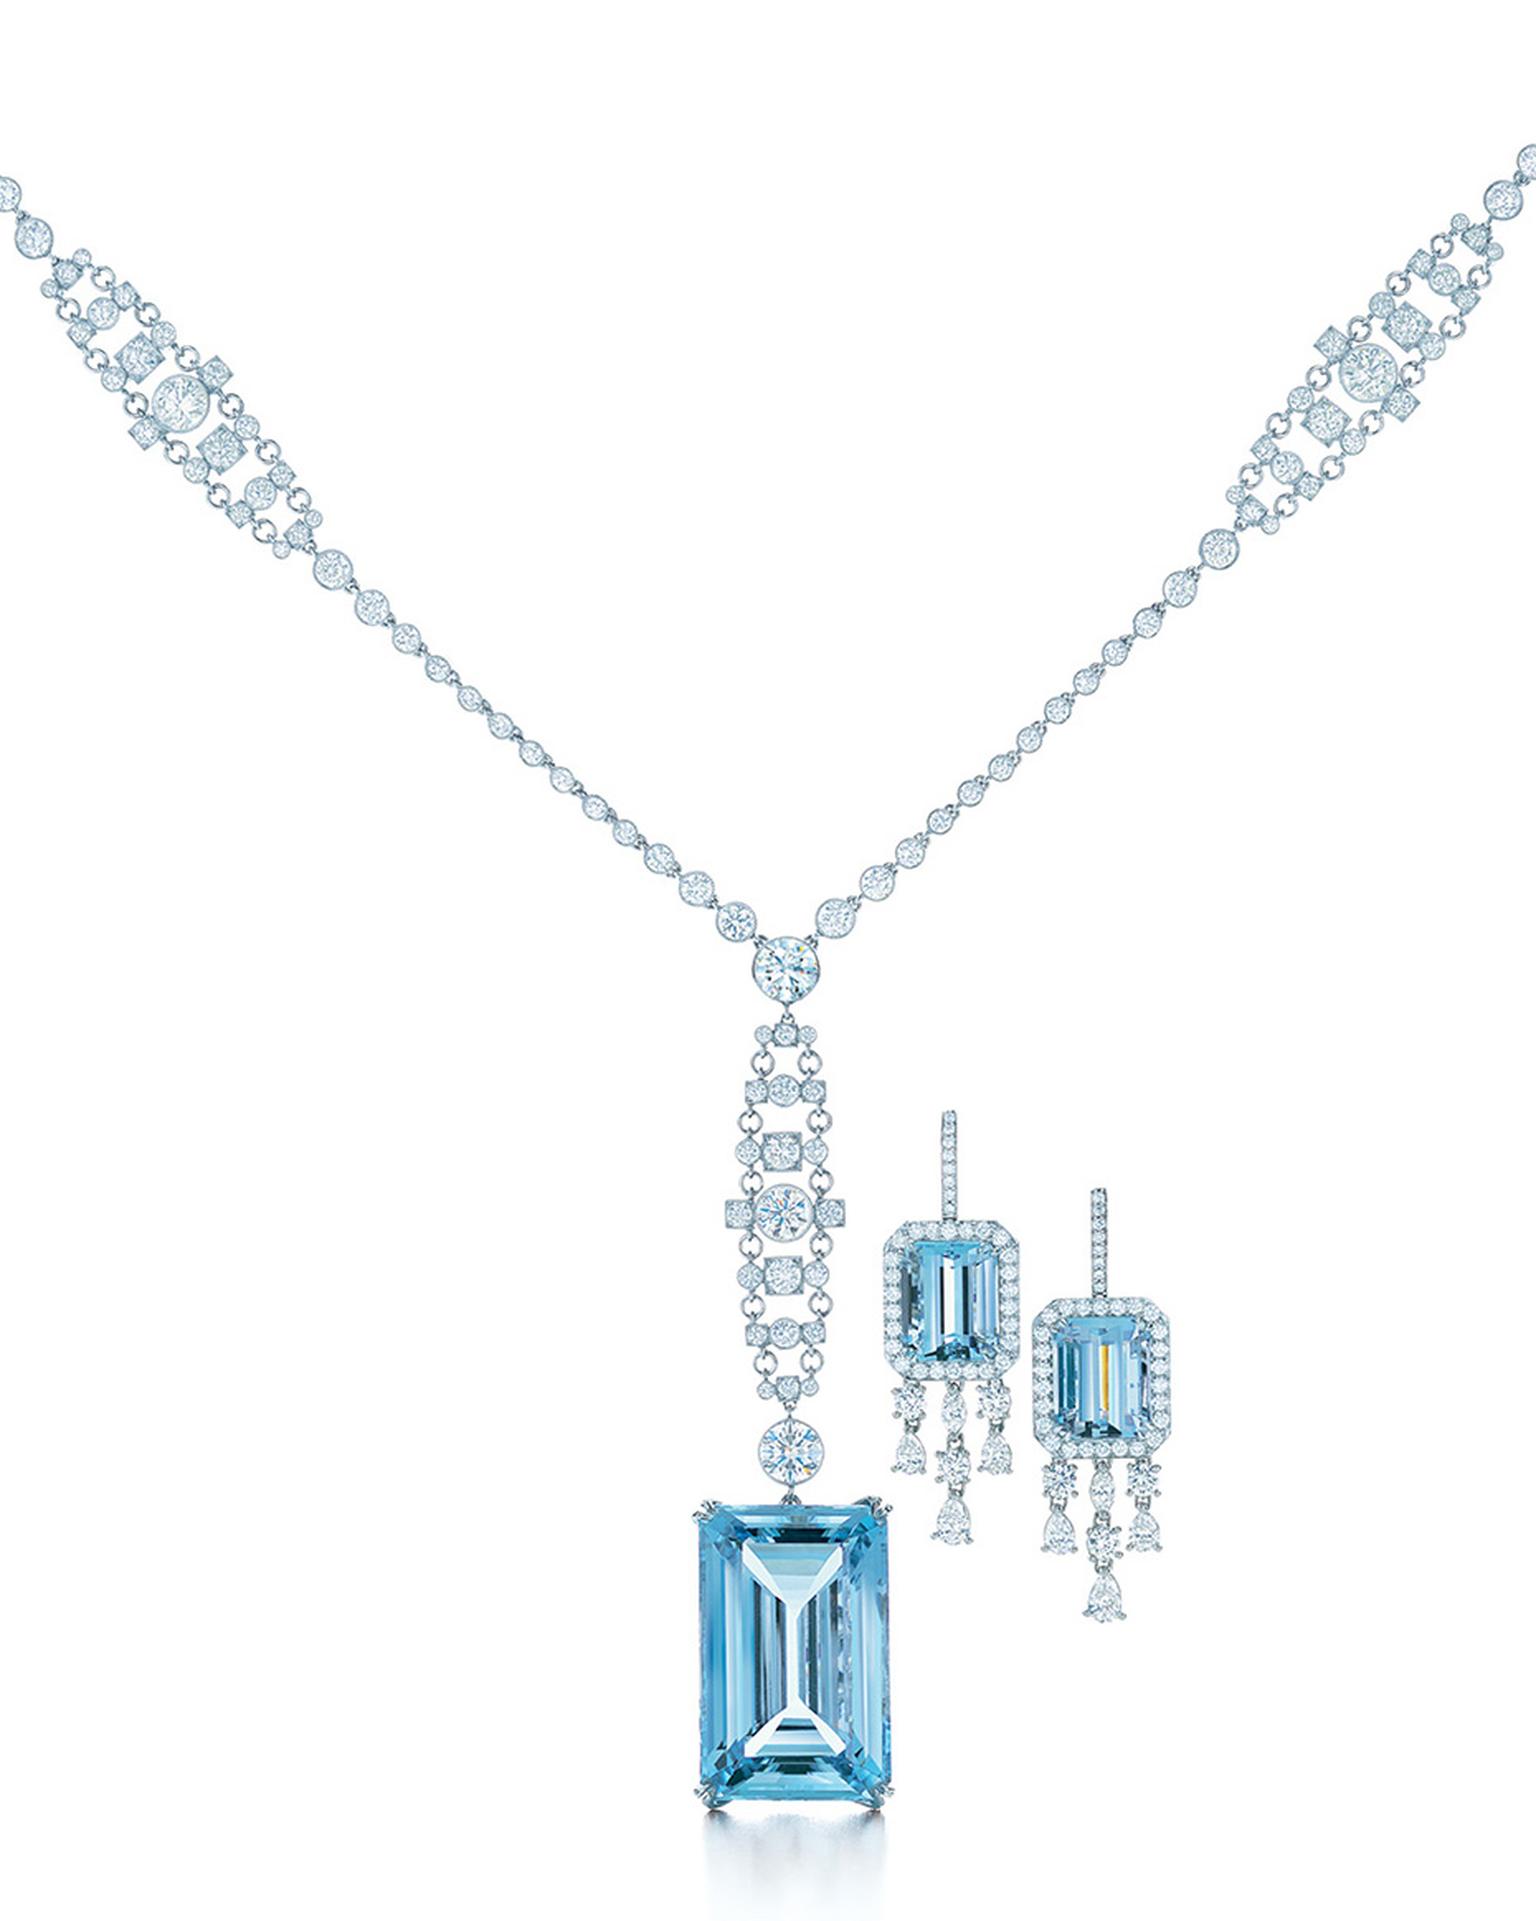 Tiffany & Co. Blue Book 2018 Mixed-cut Aquamarine Necklace . mm | Tiffany  and co necklace, Pretty jewellery, Beautiful jewelry